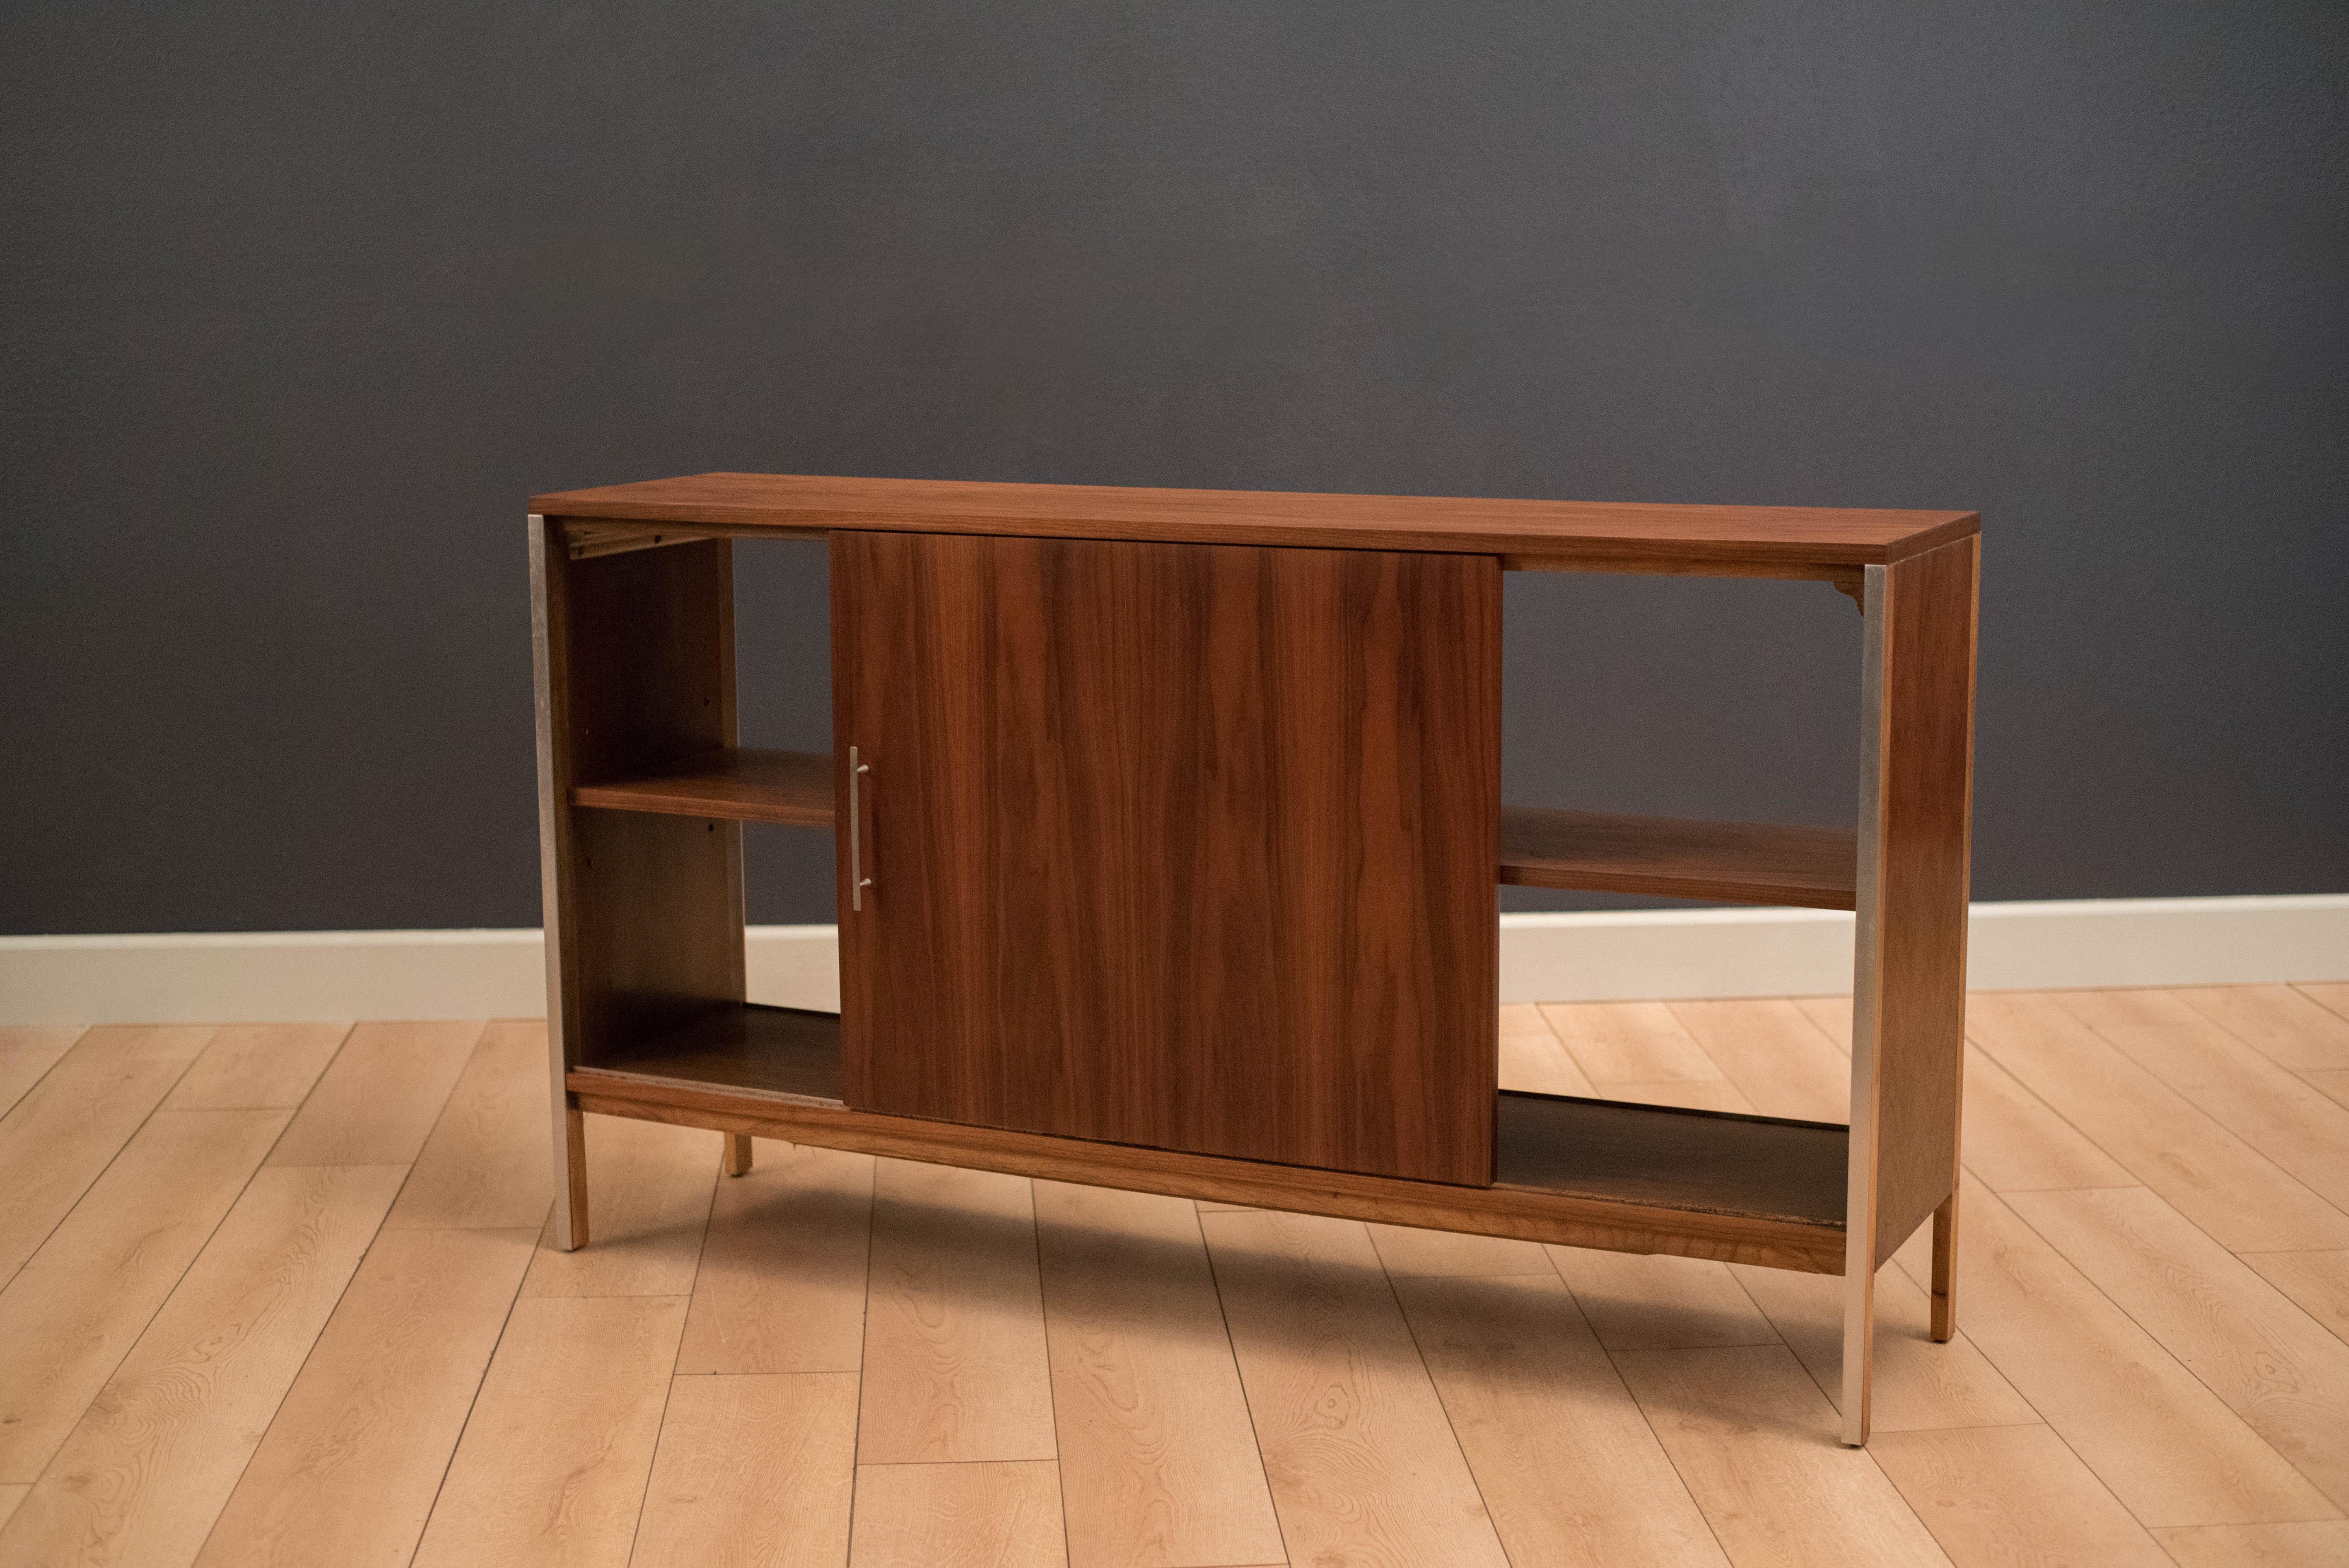 Mid-Century Modern room divider cabinet designed by Paul McCobb for the Linear collection of Calvin furniture. This versatile piece can function as a media console and displays from any angle as a room divider. Both sides of the cabinet are finished